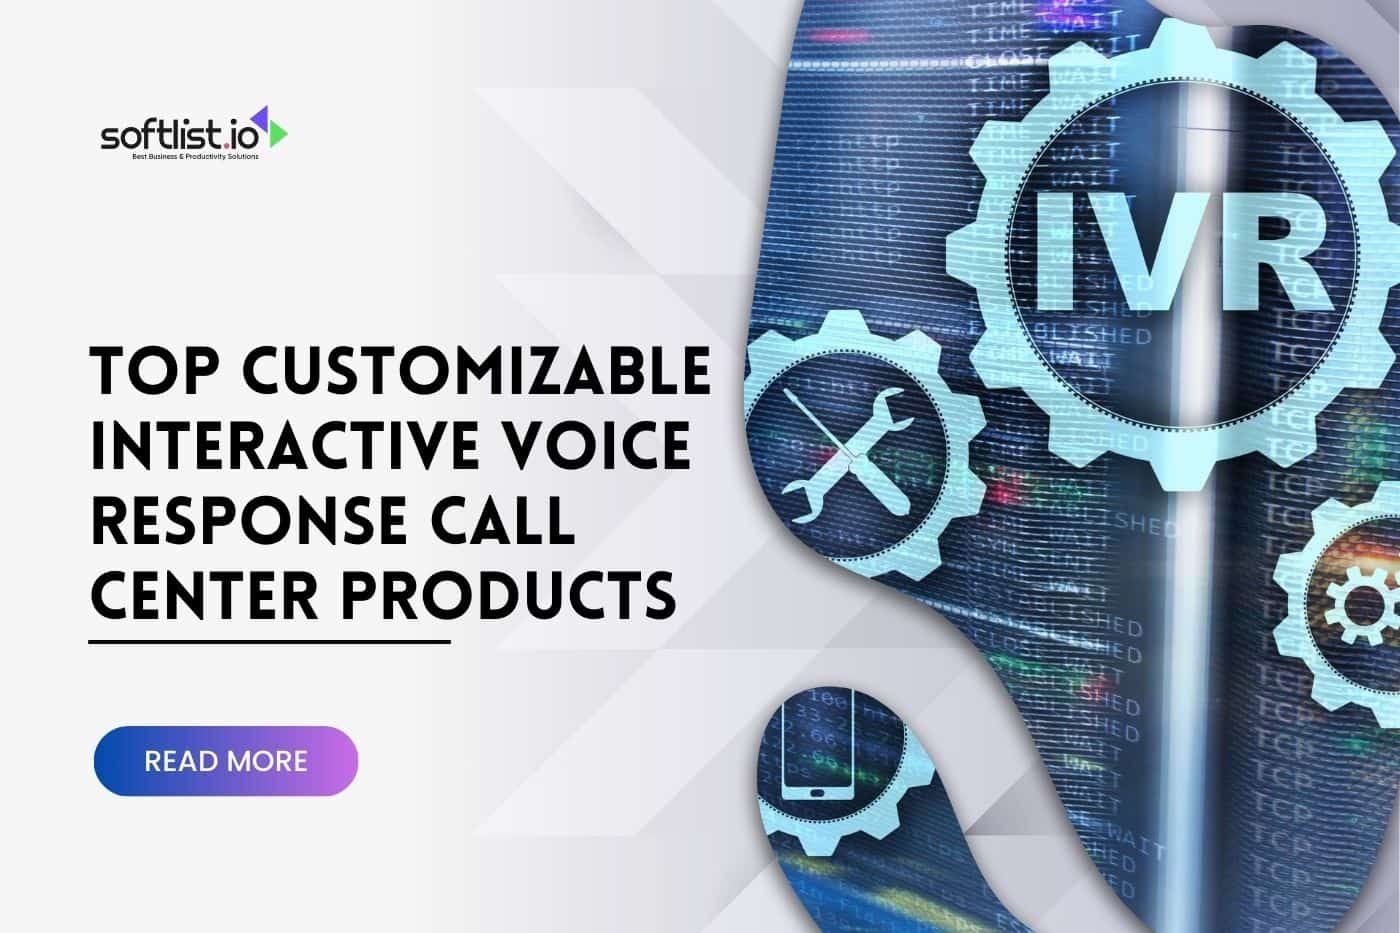 Top Customizable Interactive Voice Response Call Center Products